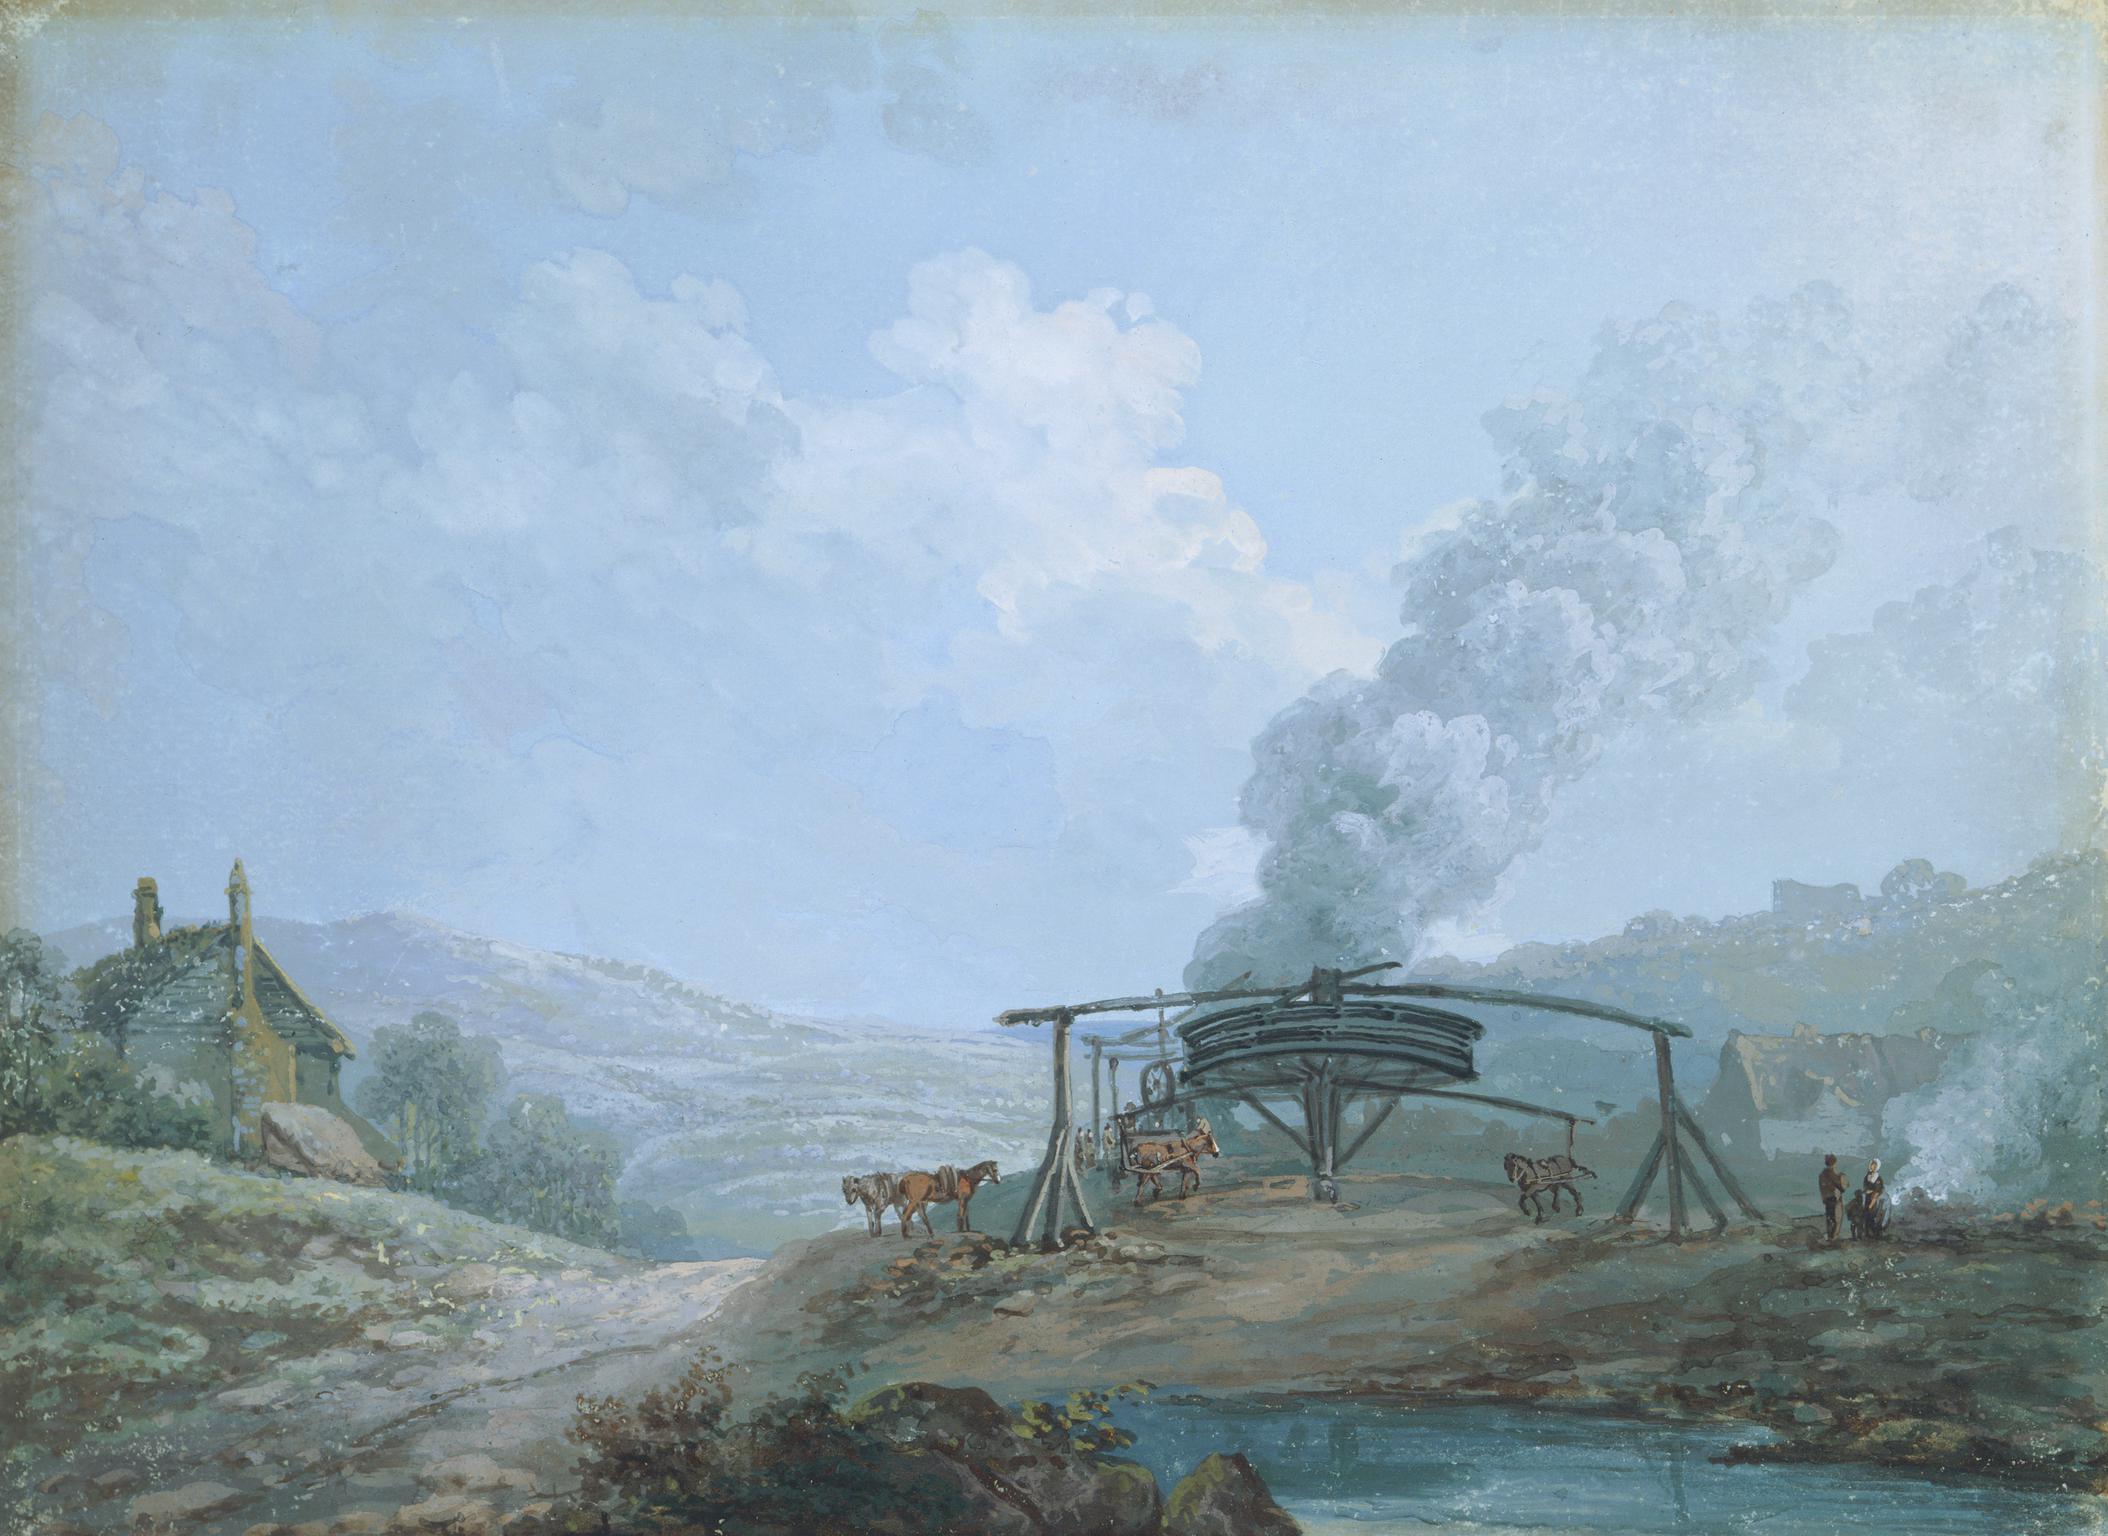 Landscape with a mine